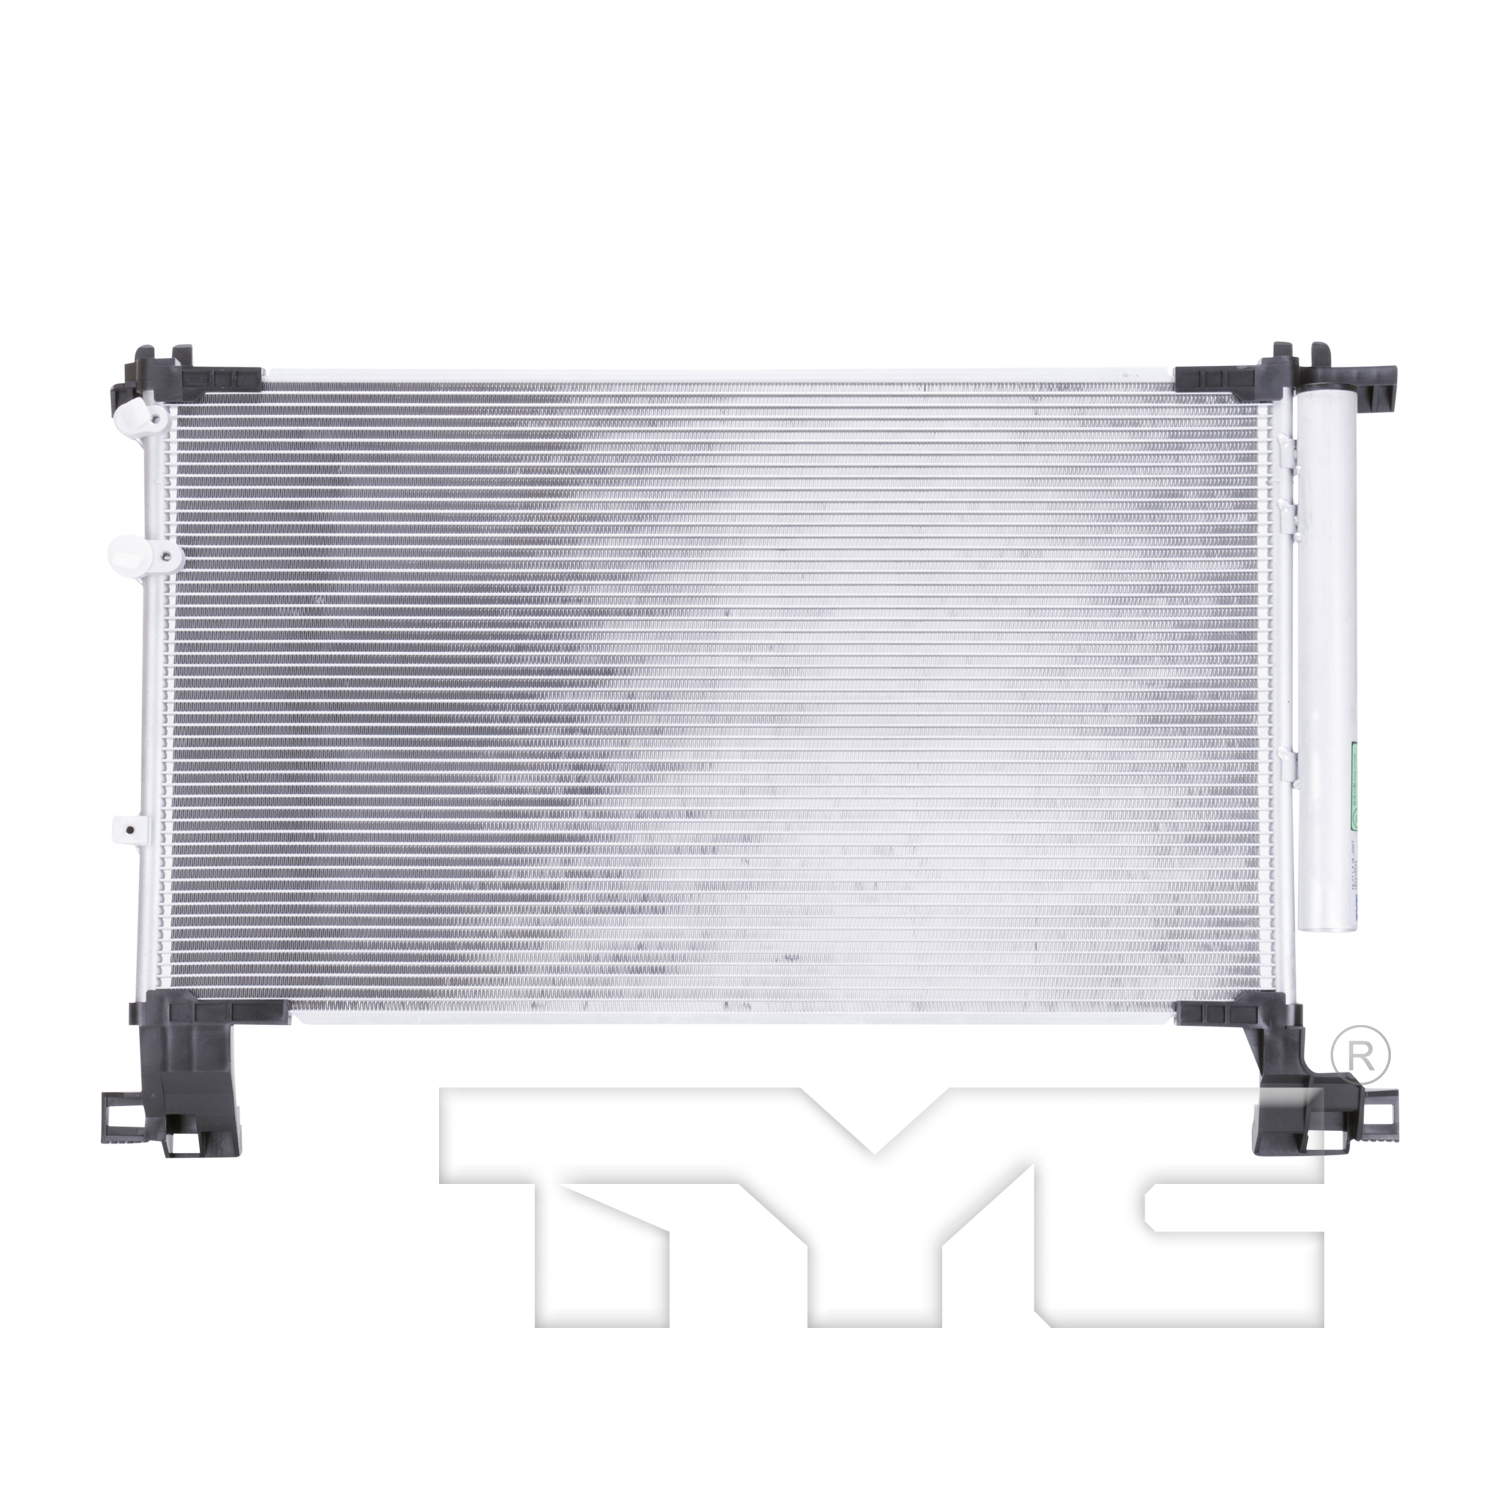 Aftermarket AC CONDENSERS for LEXUS - IS200T, IS200t,16-17,Air conditioning condenser